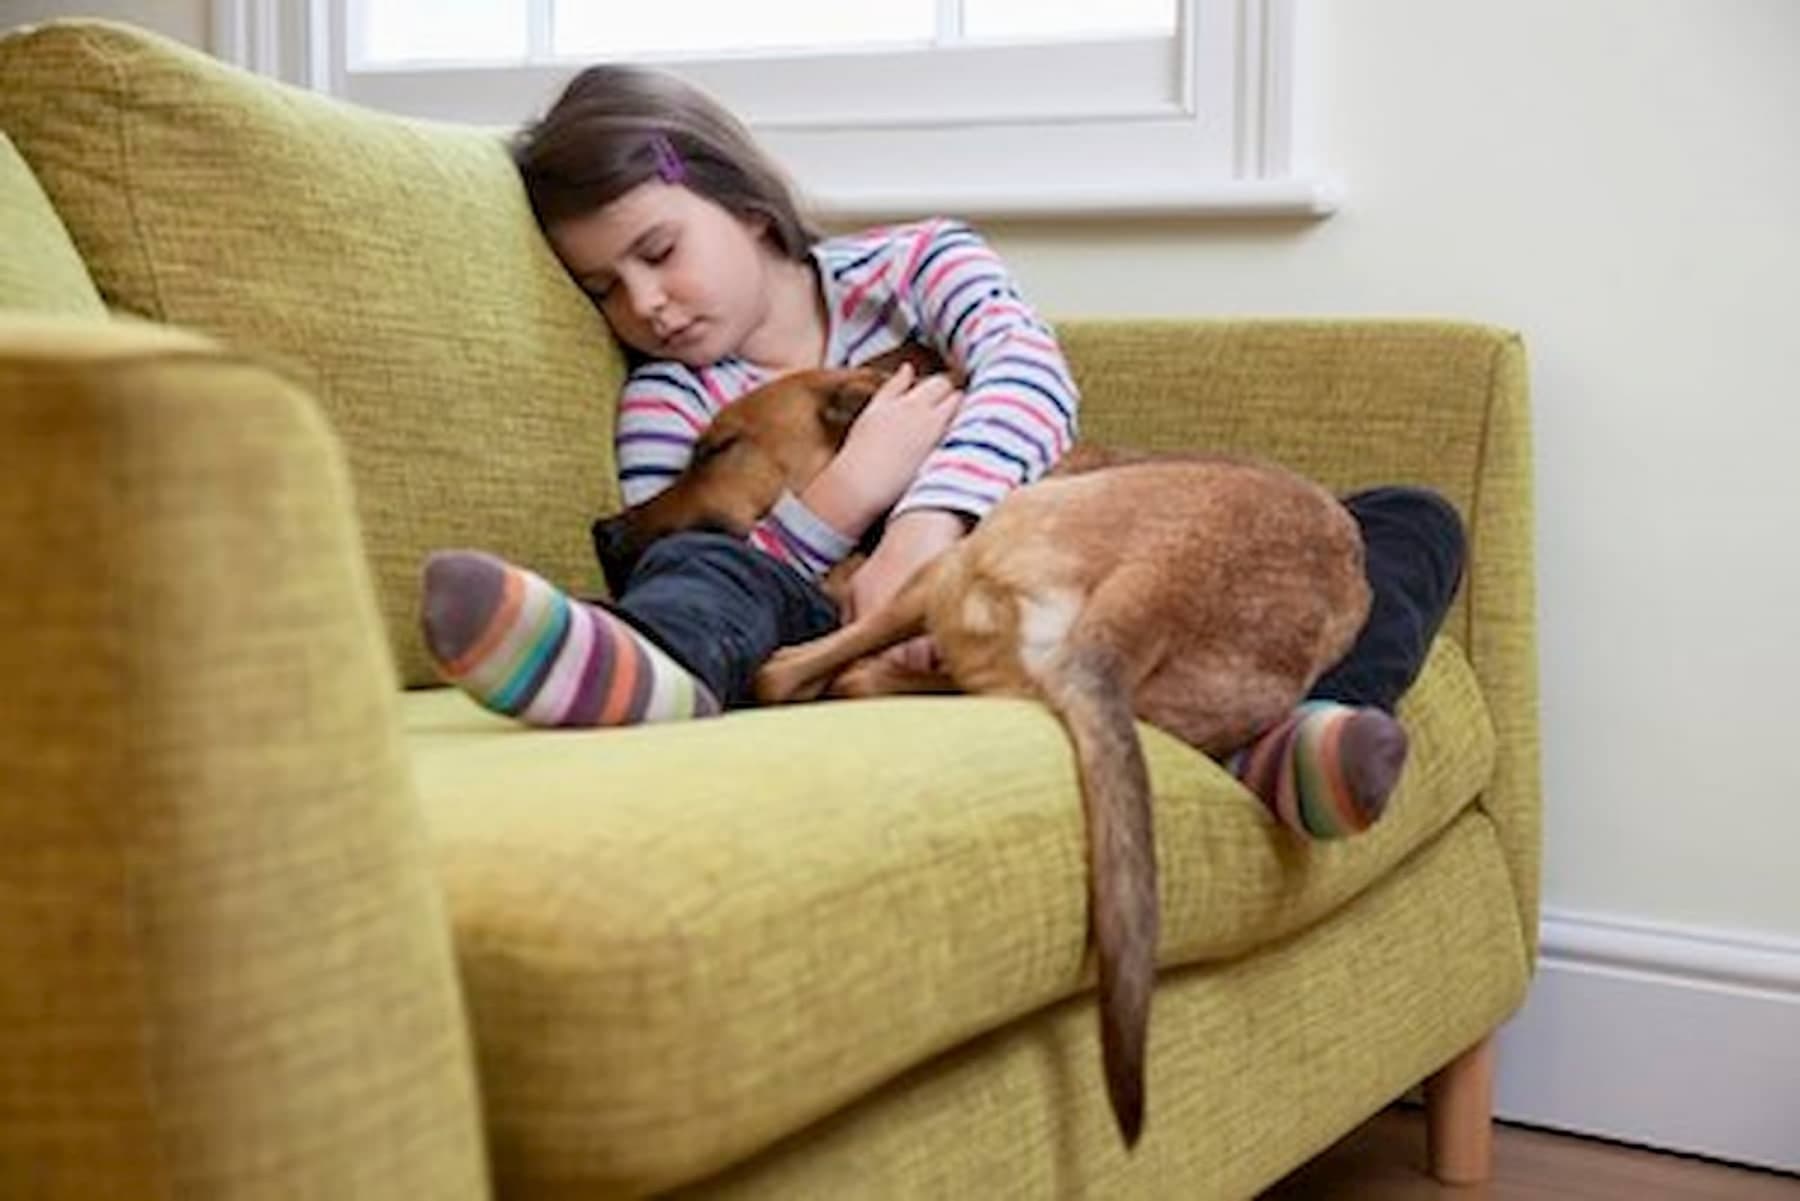 Sleeping child hugging dog on couch